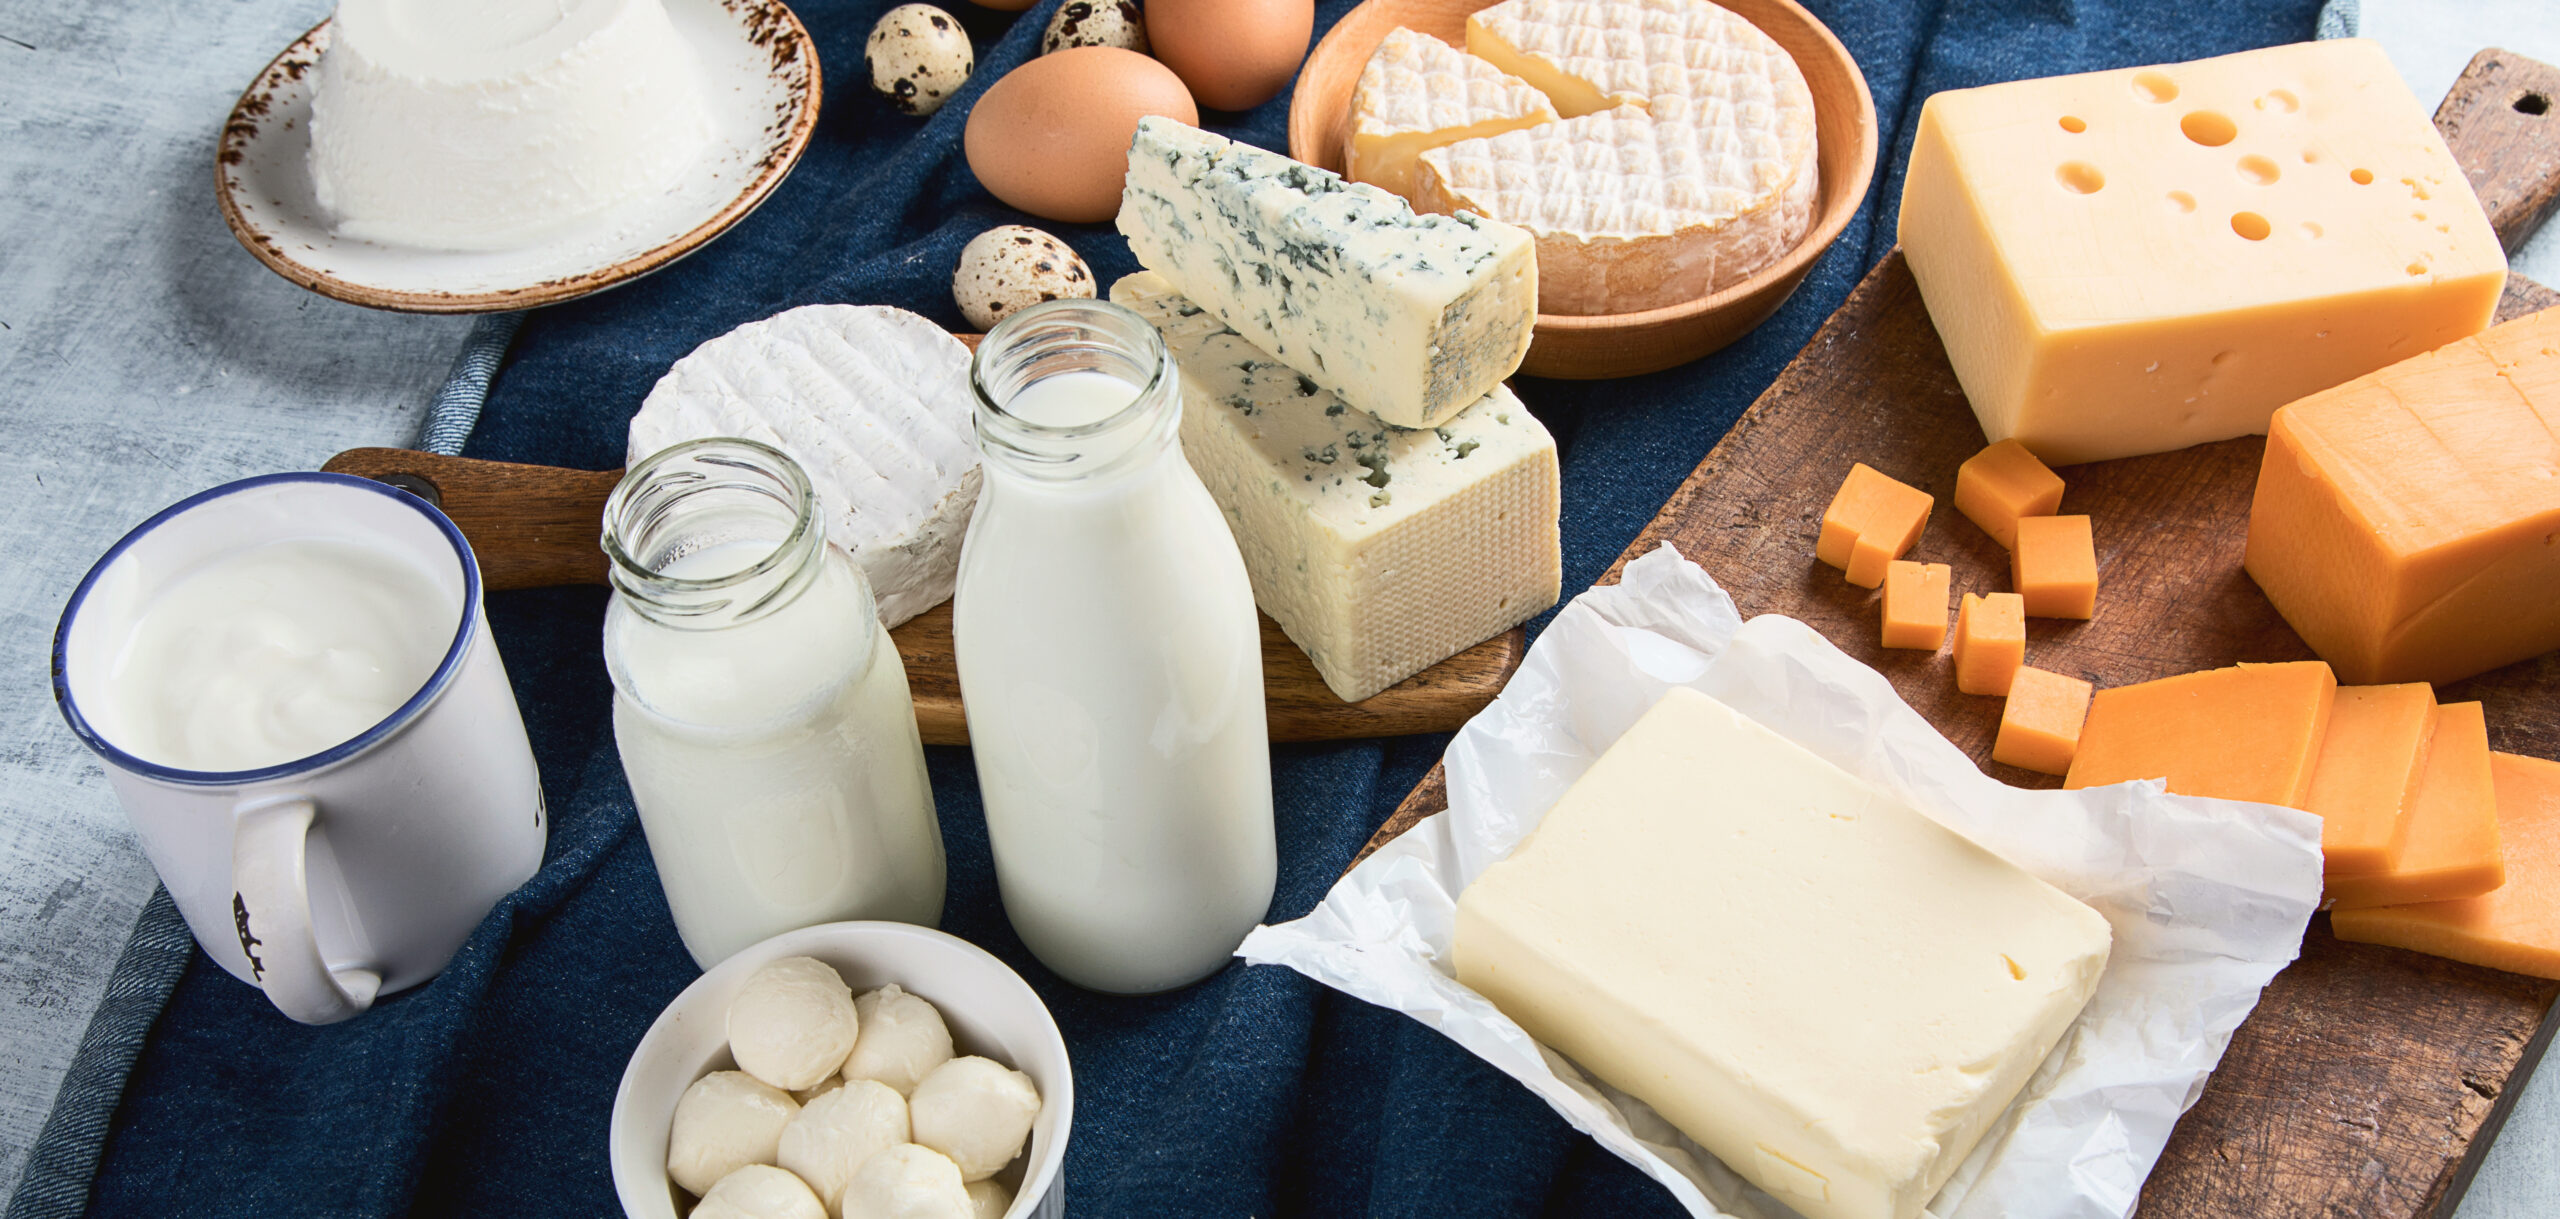 June is National Dairy Month